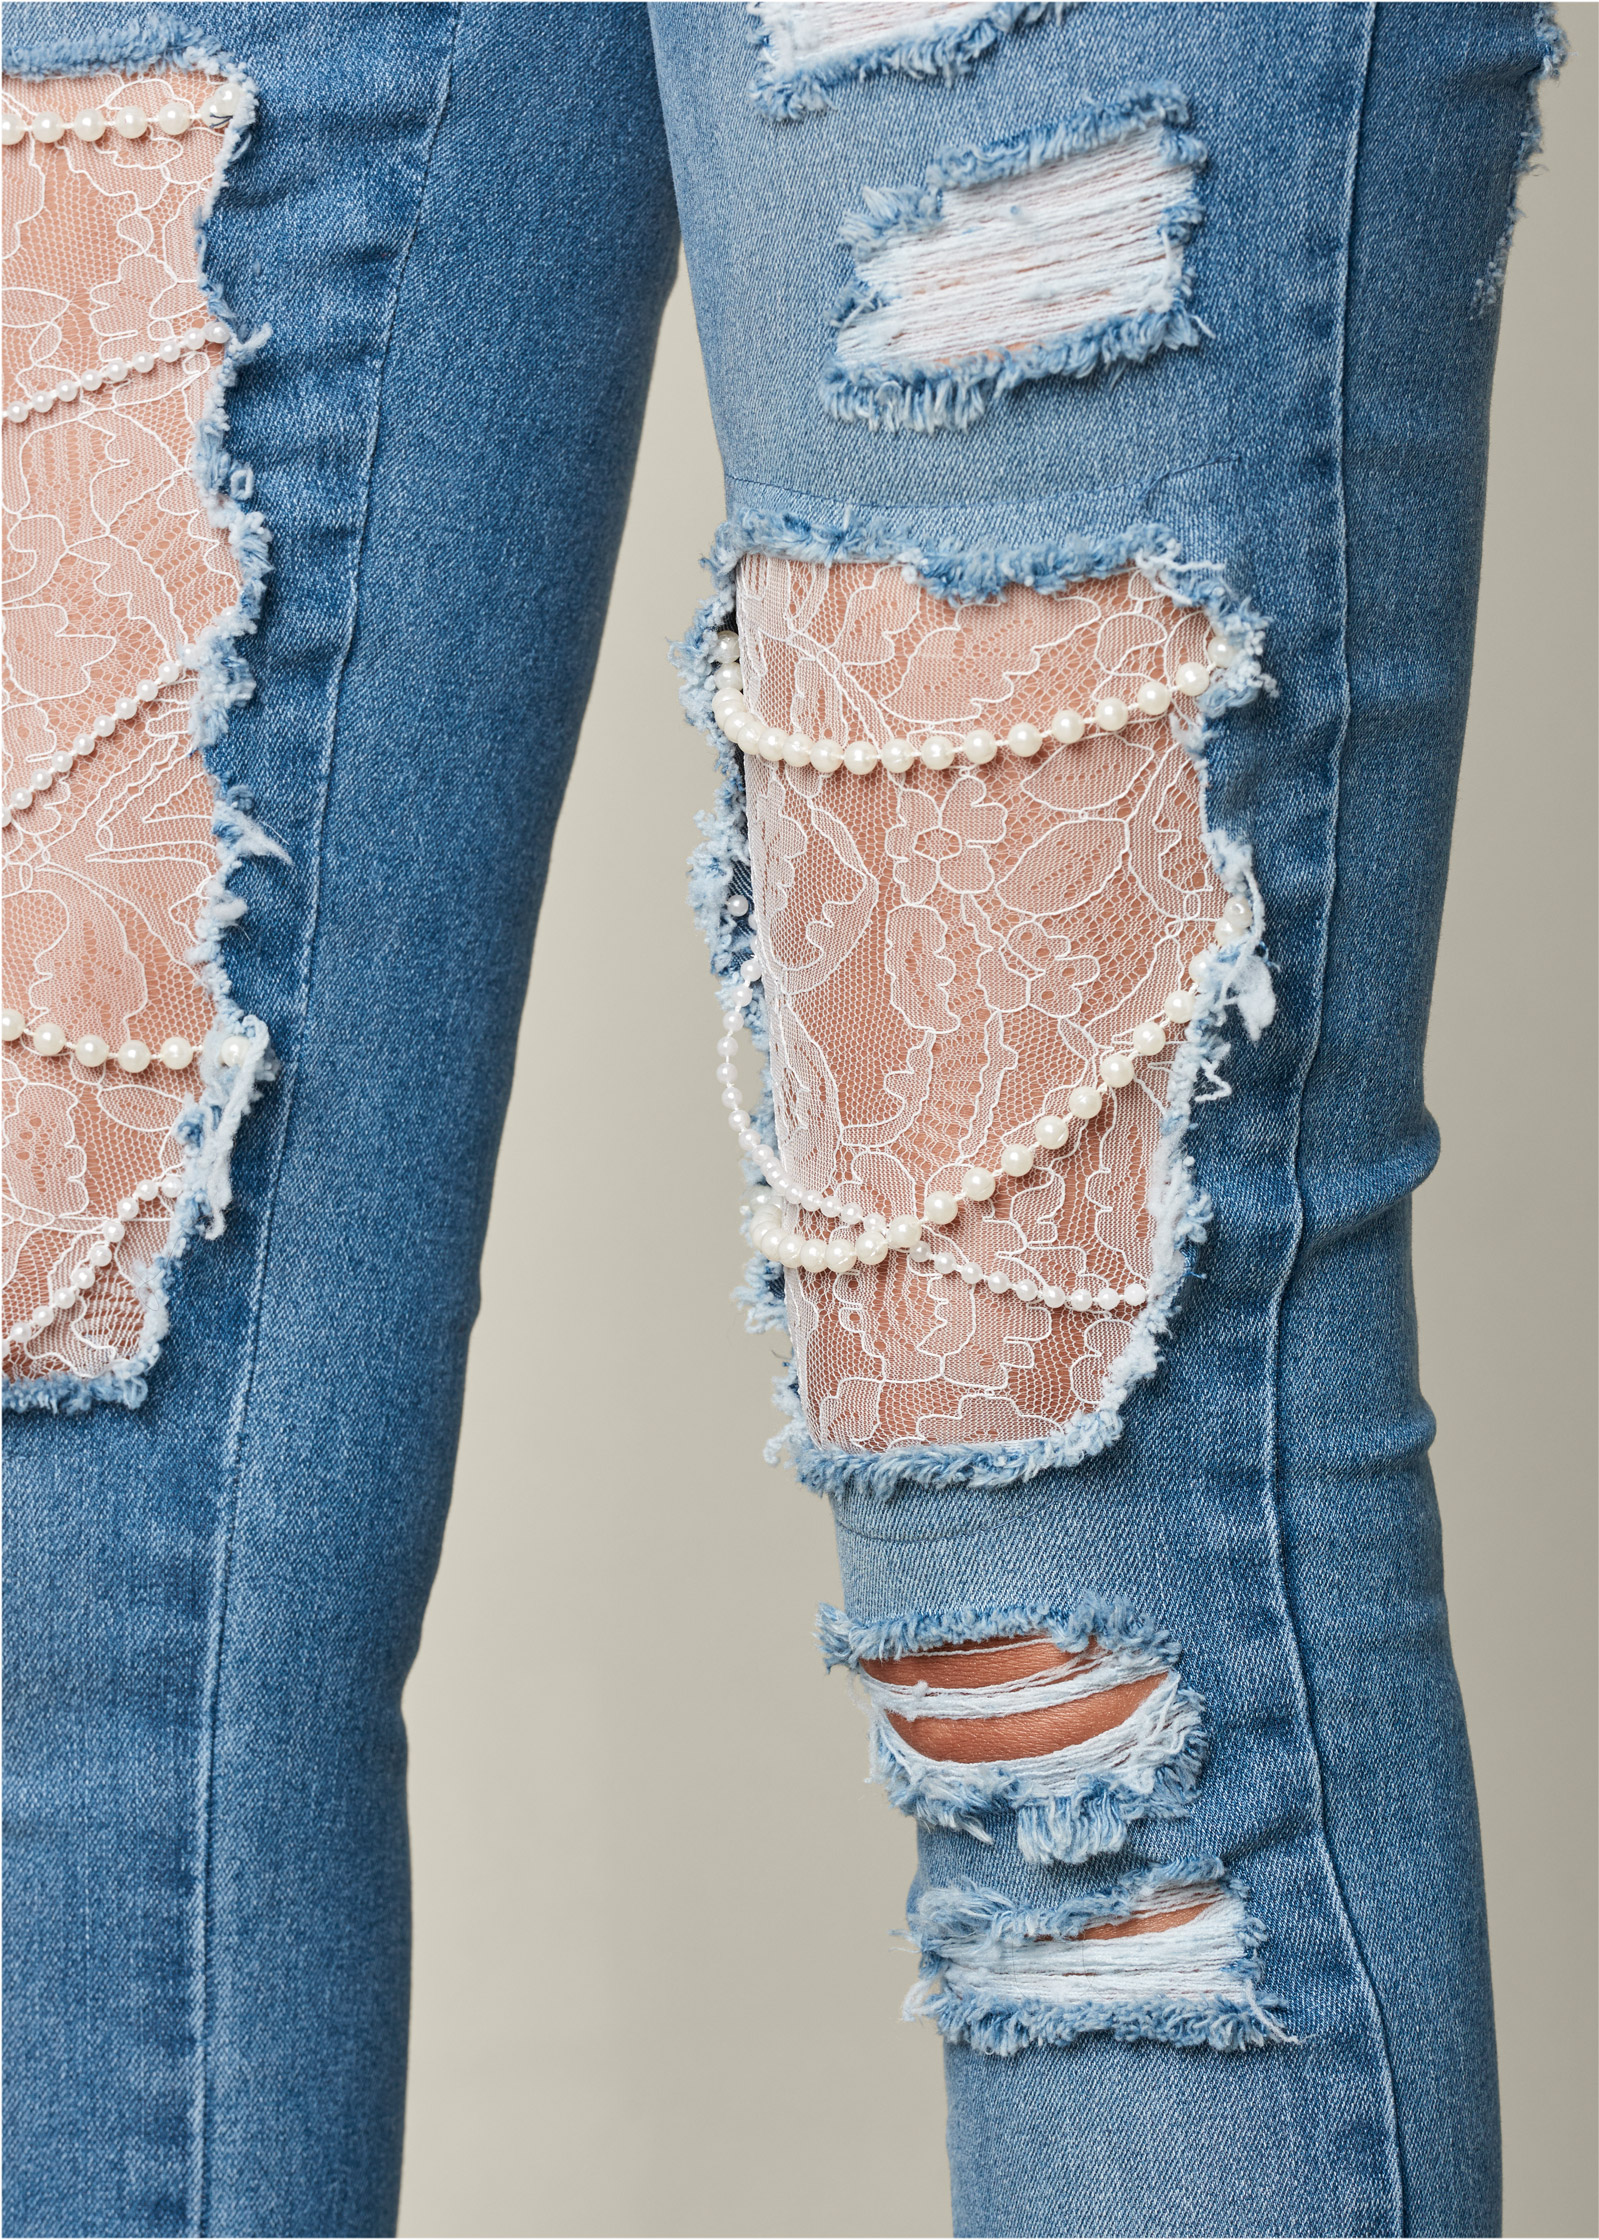 distressed jeans with pearls